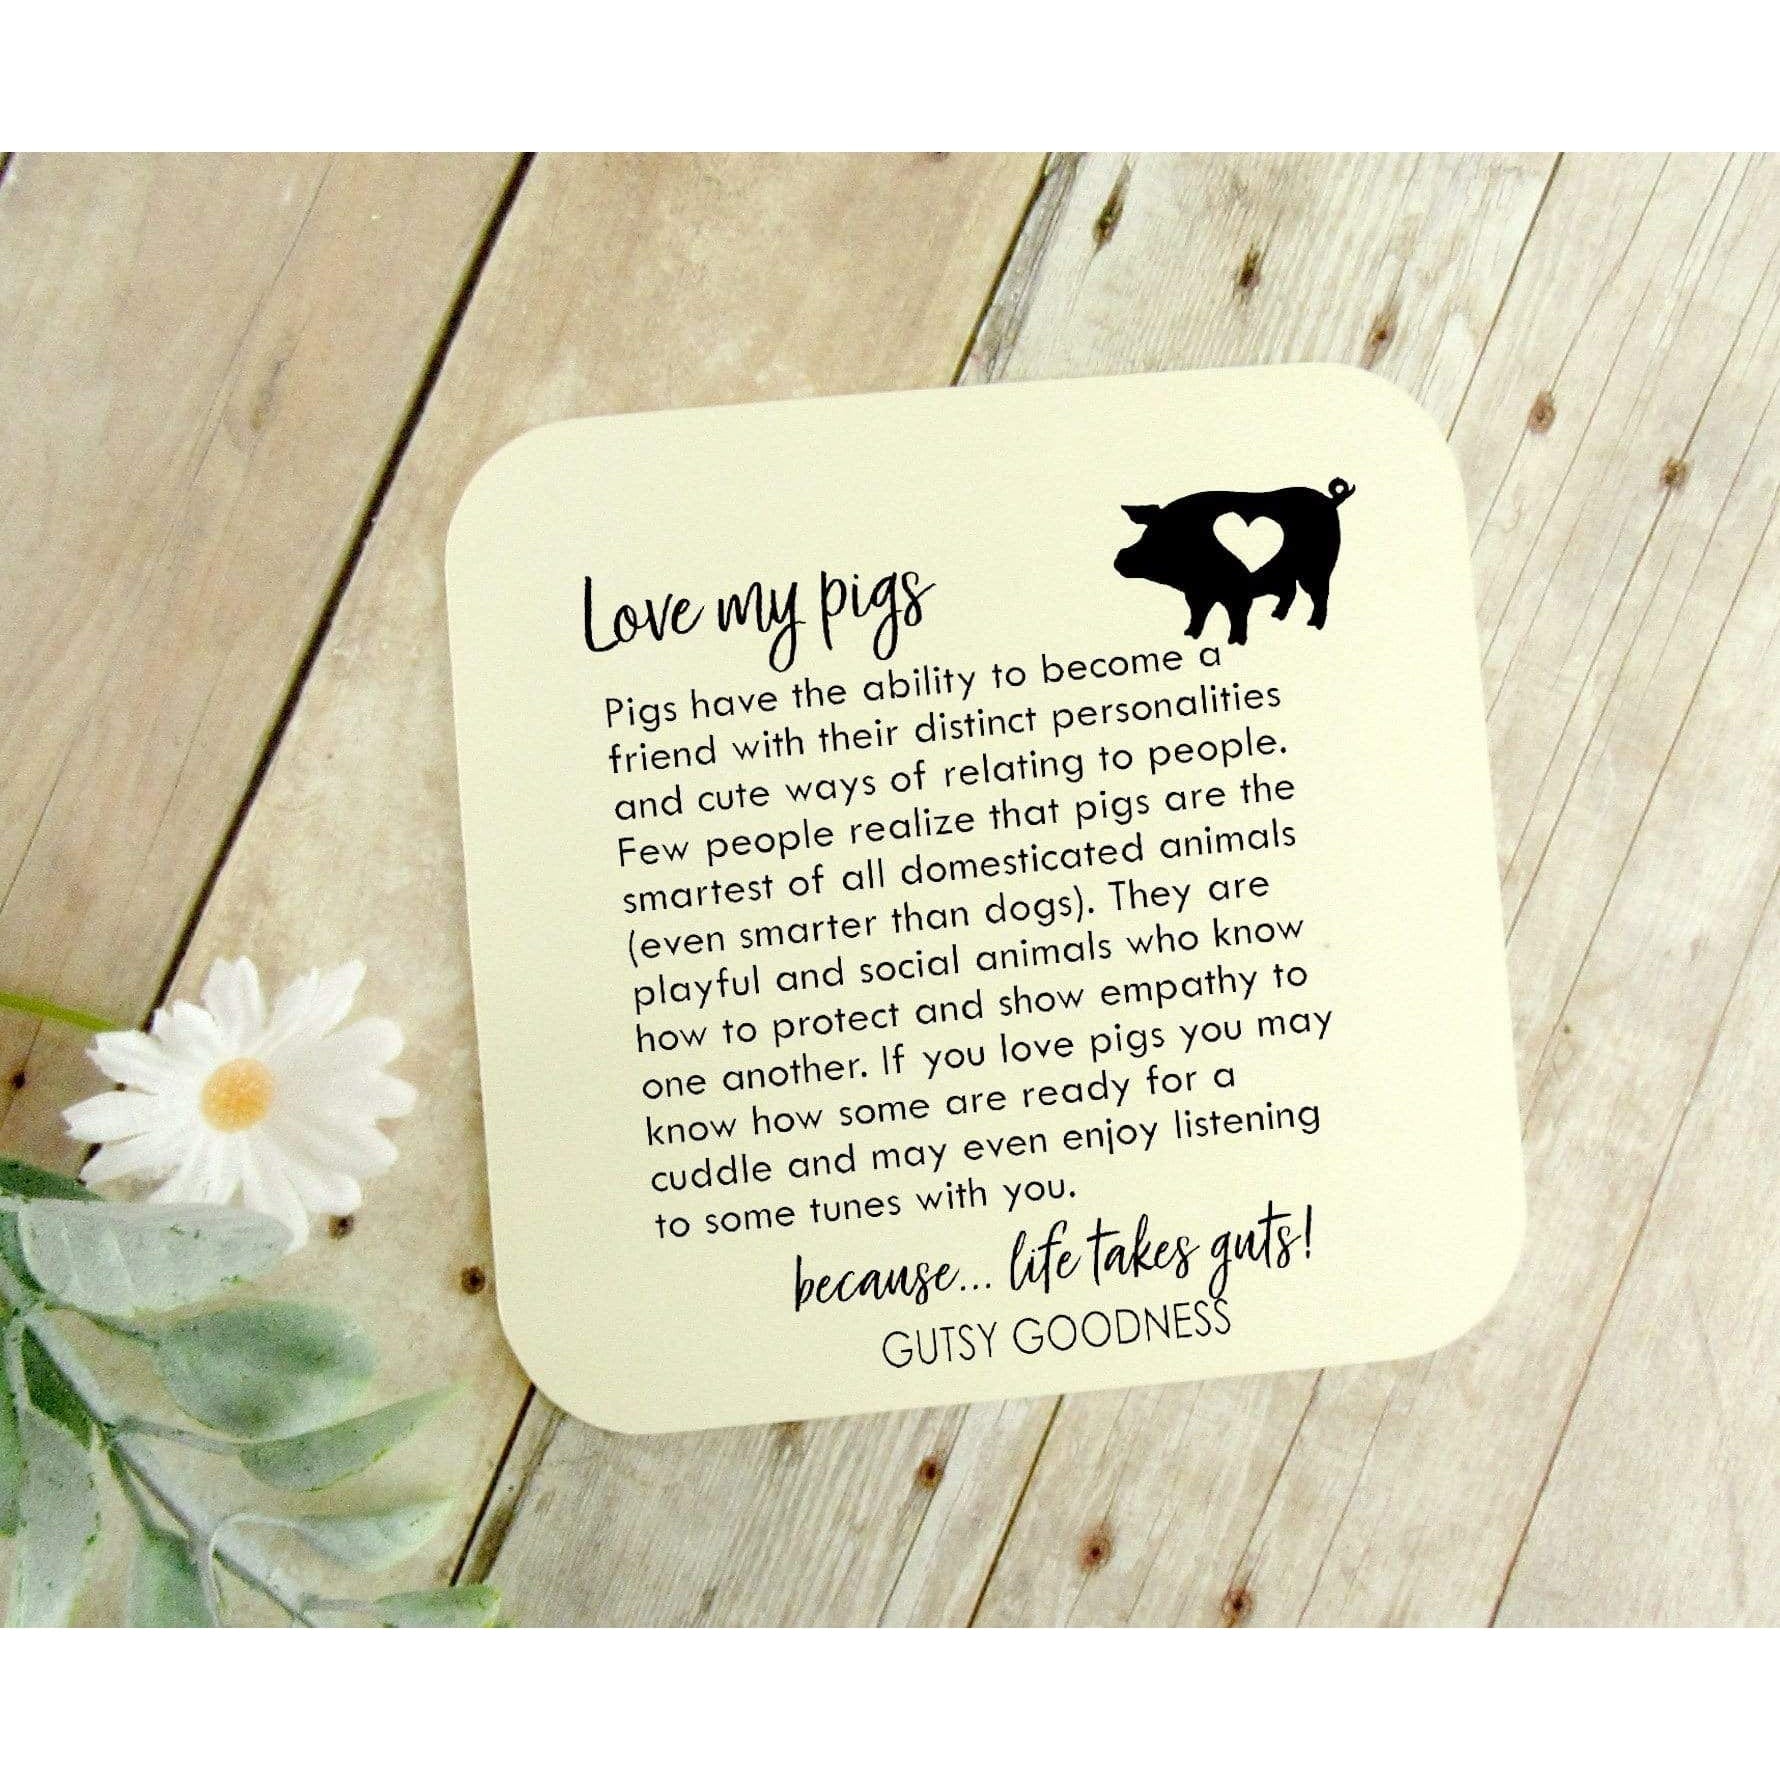 Home is Where My Pigs Are Keychain, Handmade! - The Pink Pigs, Animal Lover's Boutique